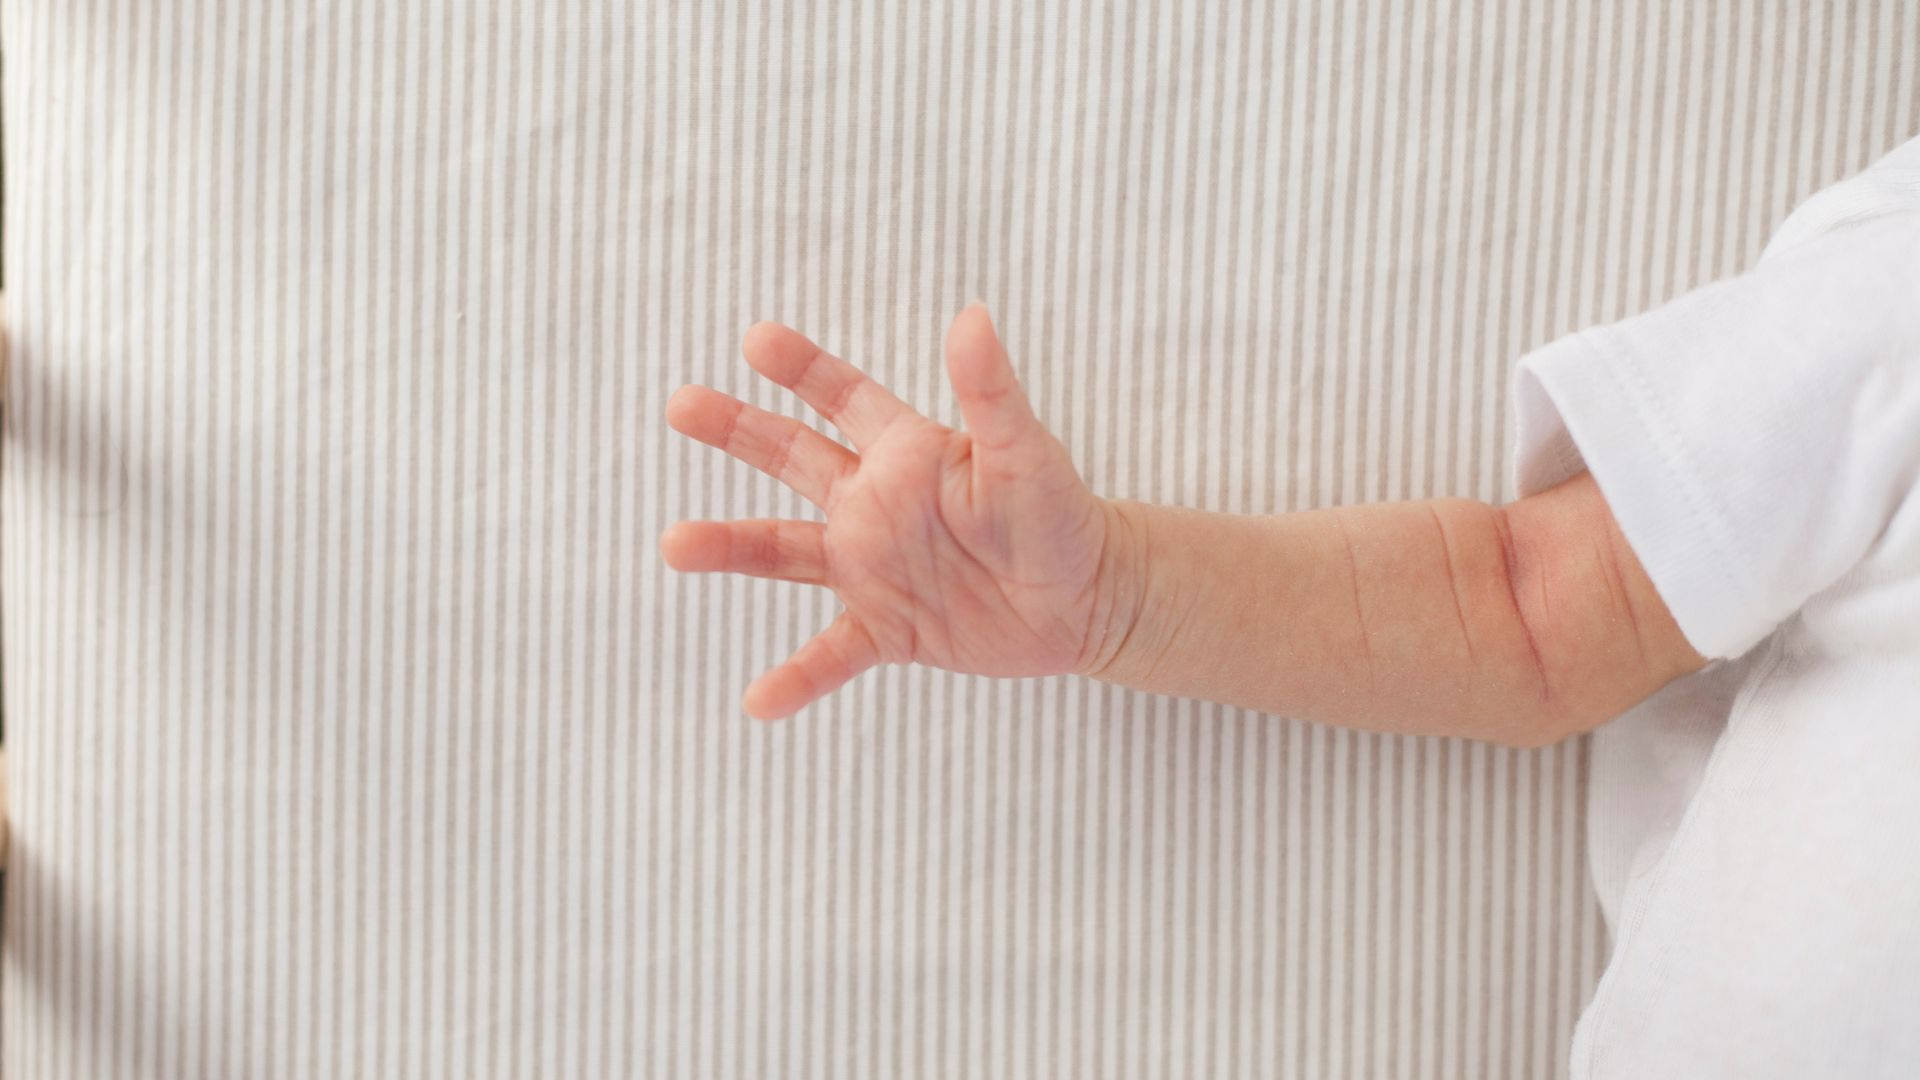 Baby Hand Fingers Stretched Out Wallpaper